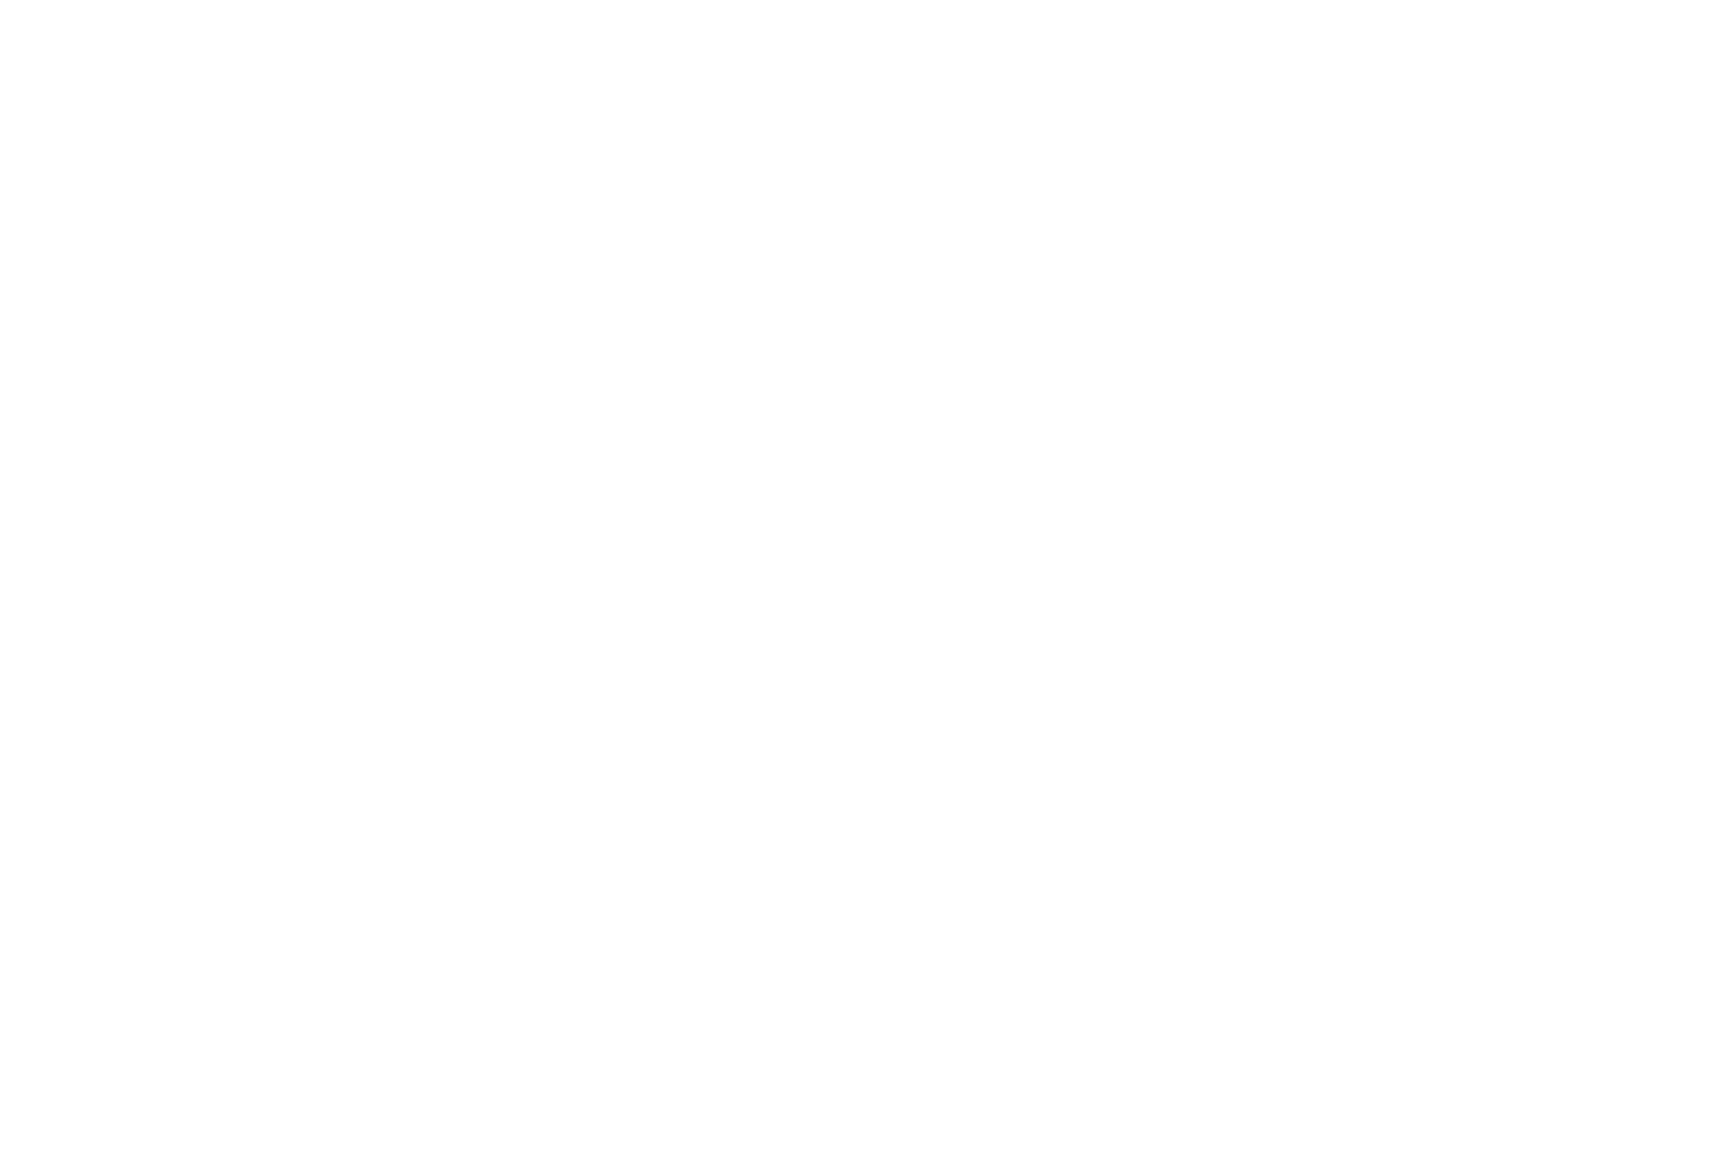 Semi-Finalist at the SDGs for Metaverse Competition 2023.